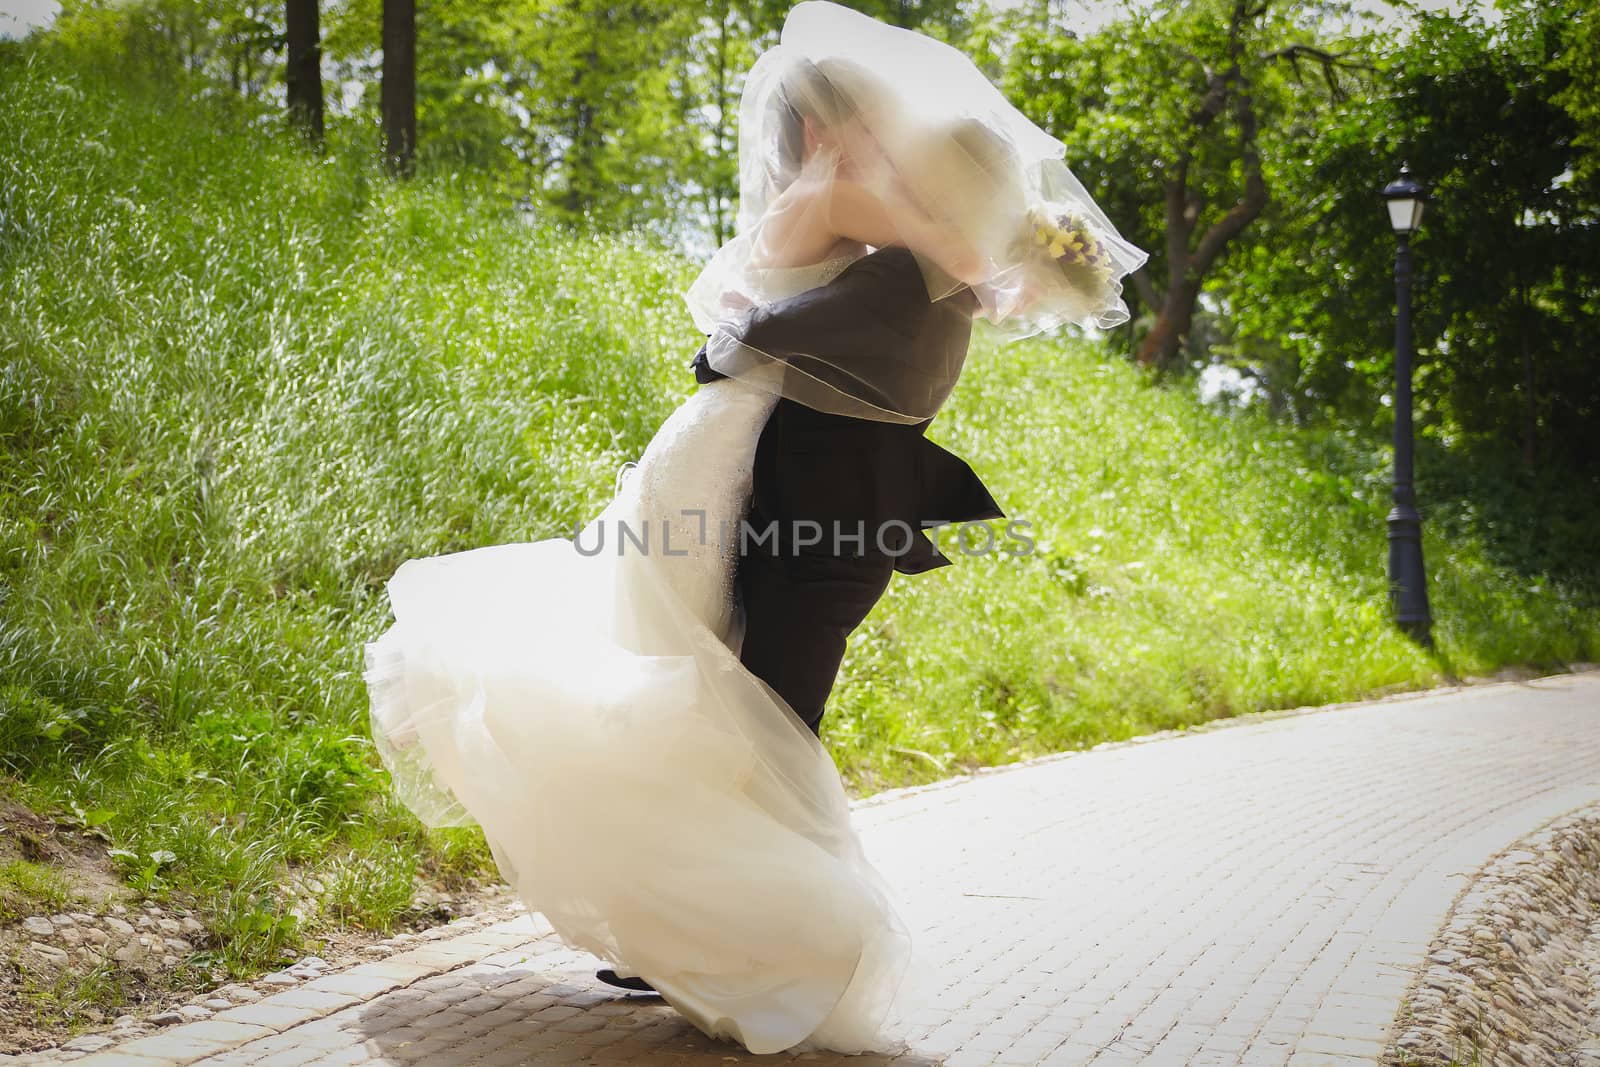 The bride and groom in the summer on a Sunny day spinning in the dance by Mastak80